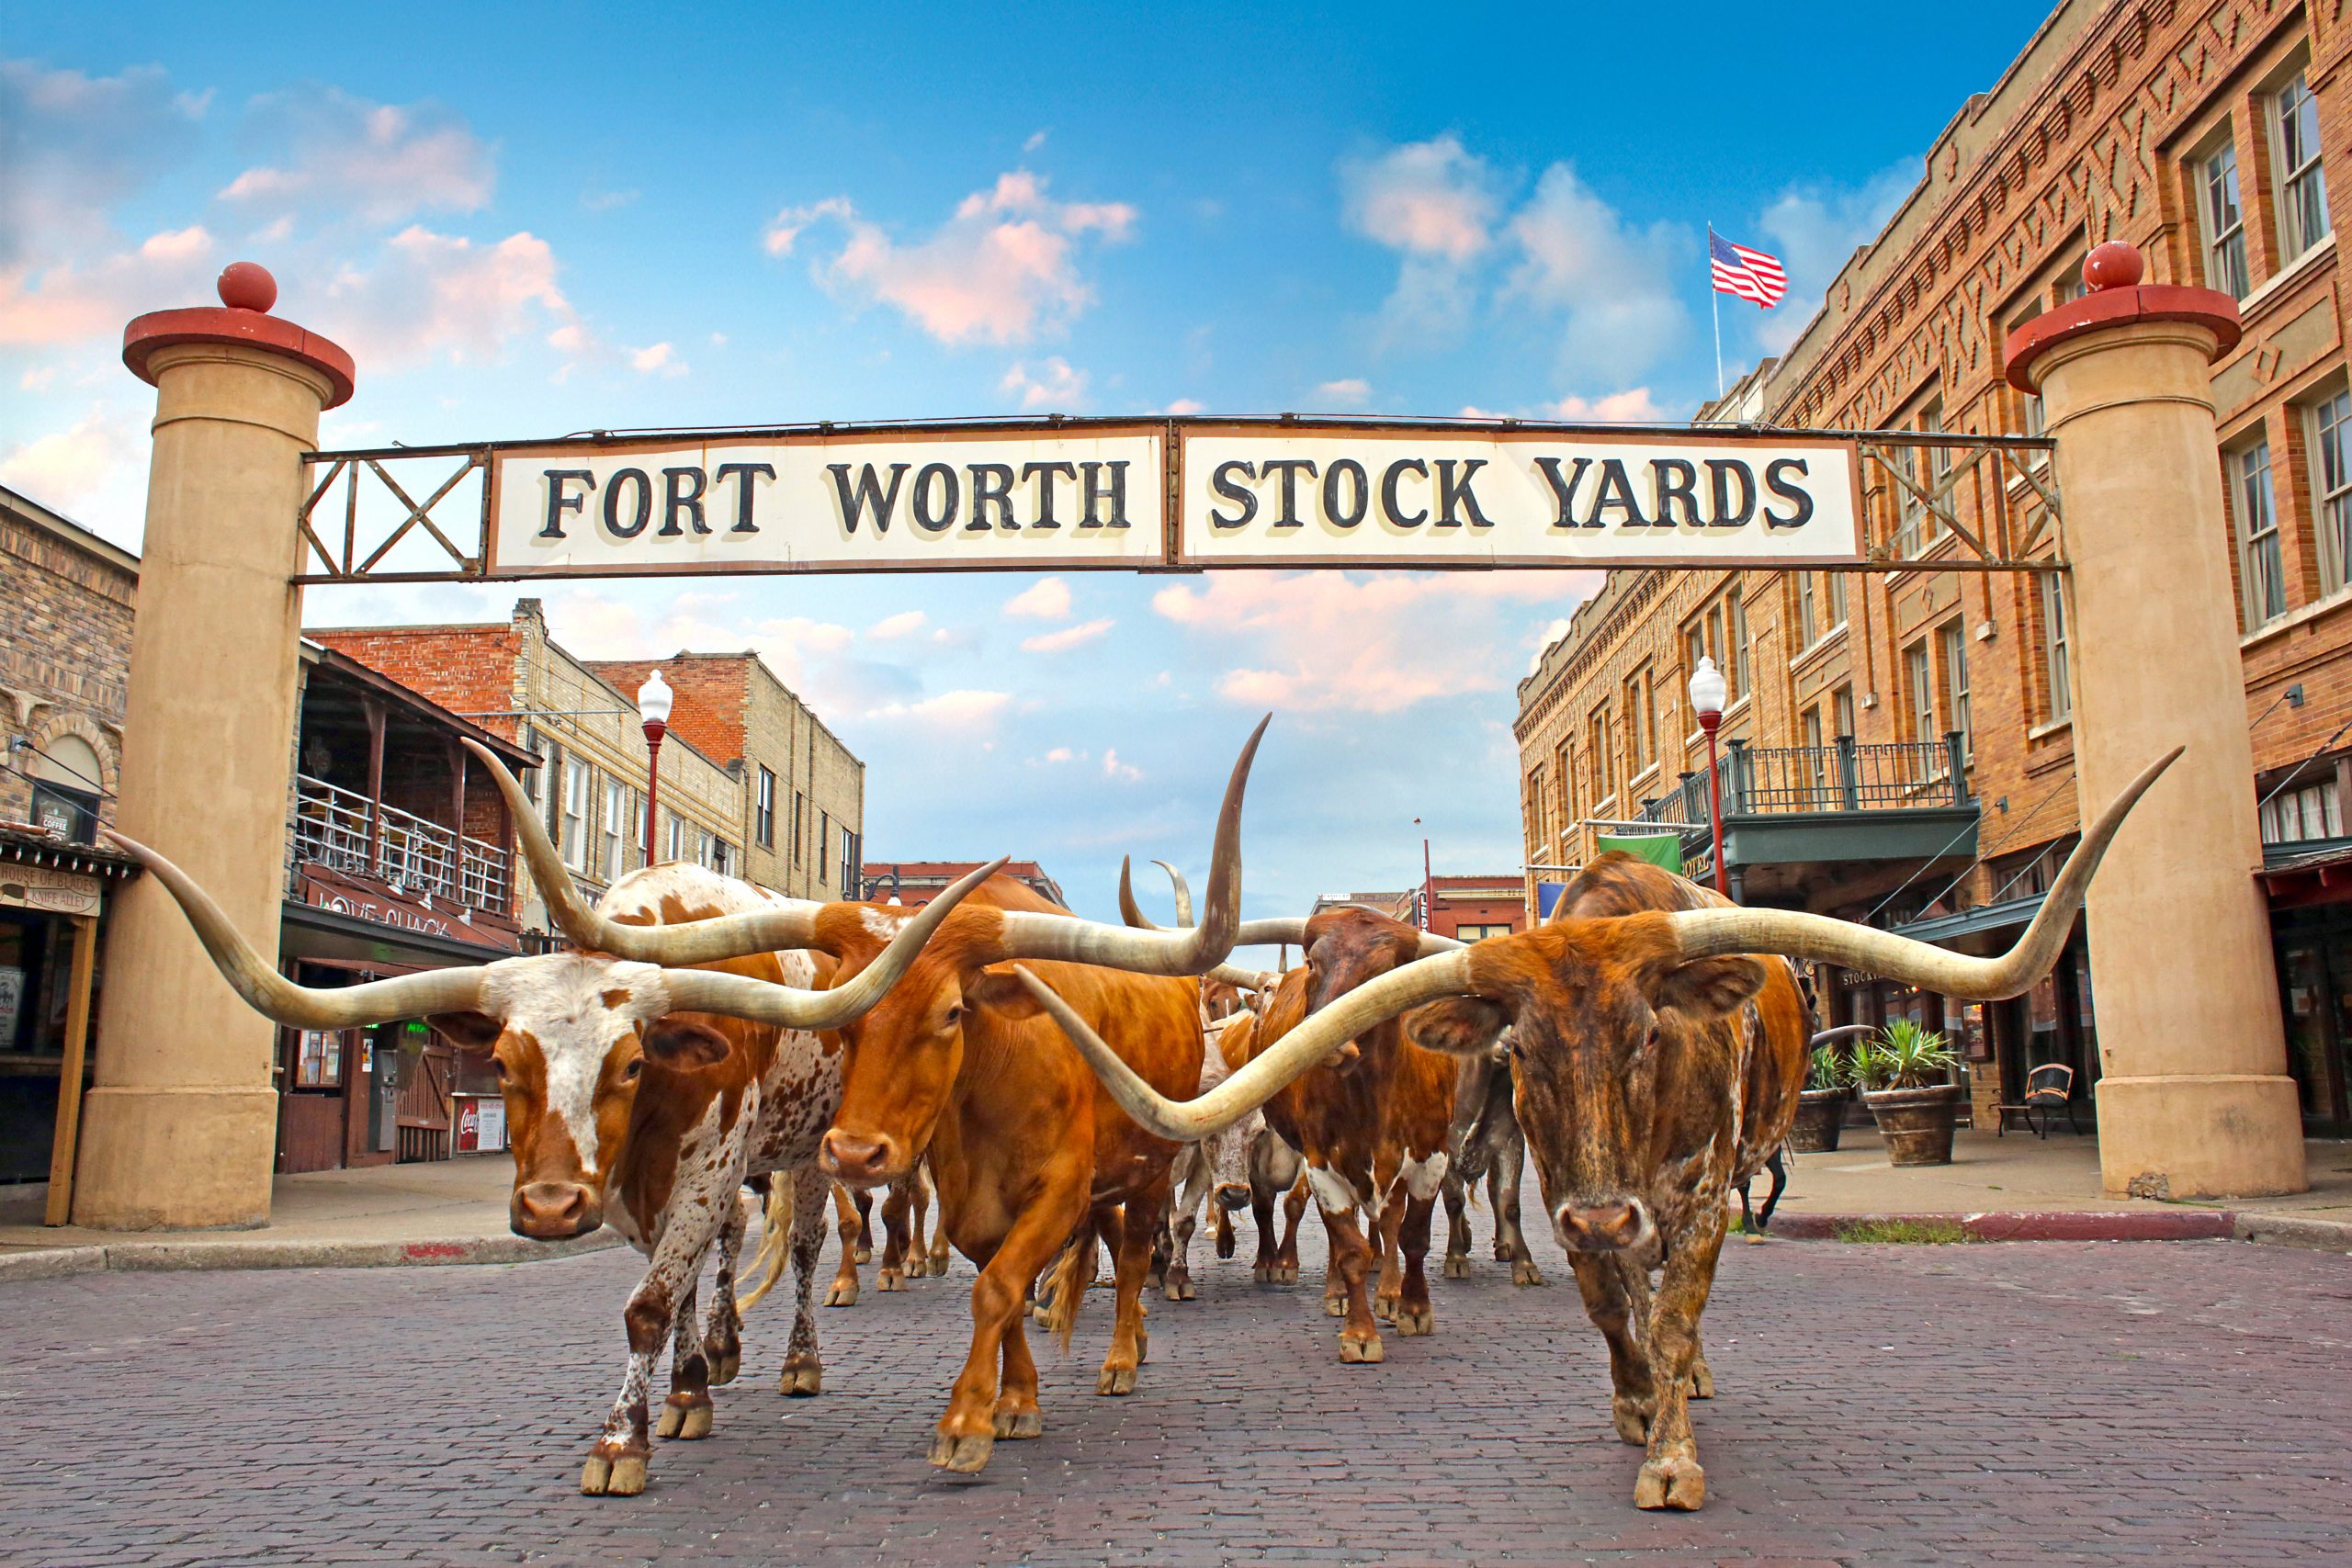 Mule Alley in the Fort Worth Stockyards offers Wrangler NFR Events,  Shopping - Barrel Horse News